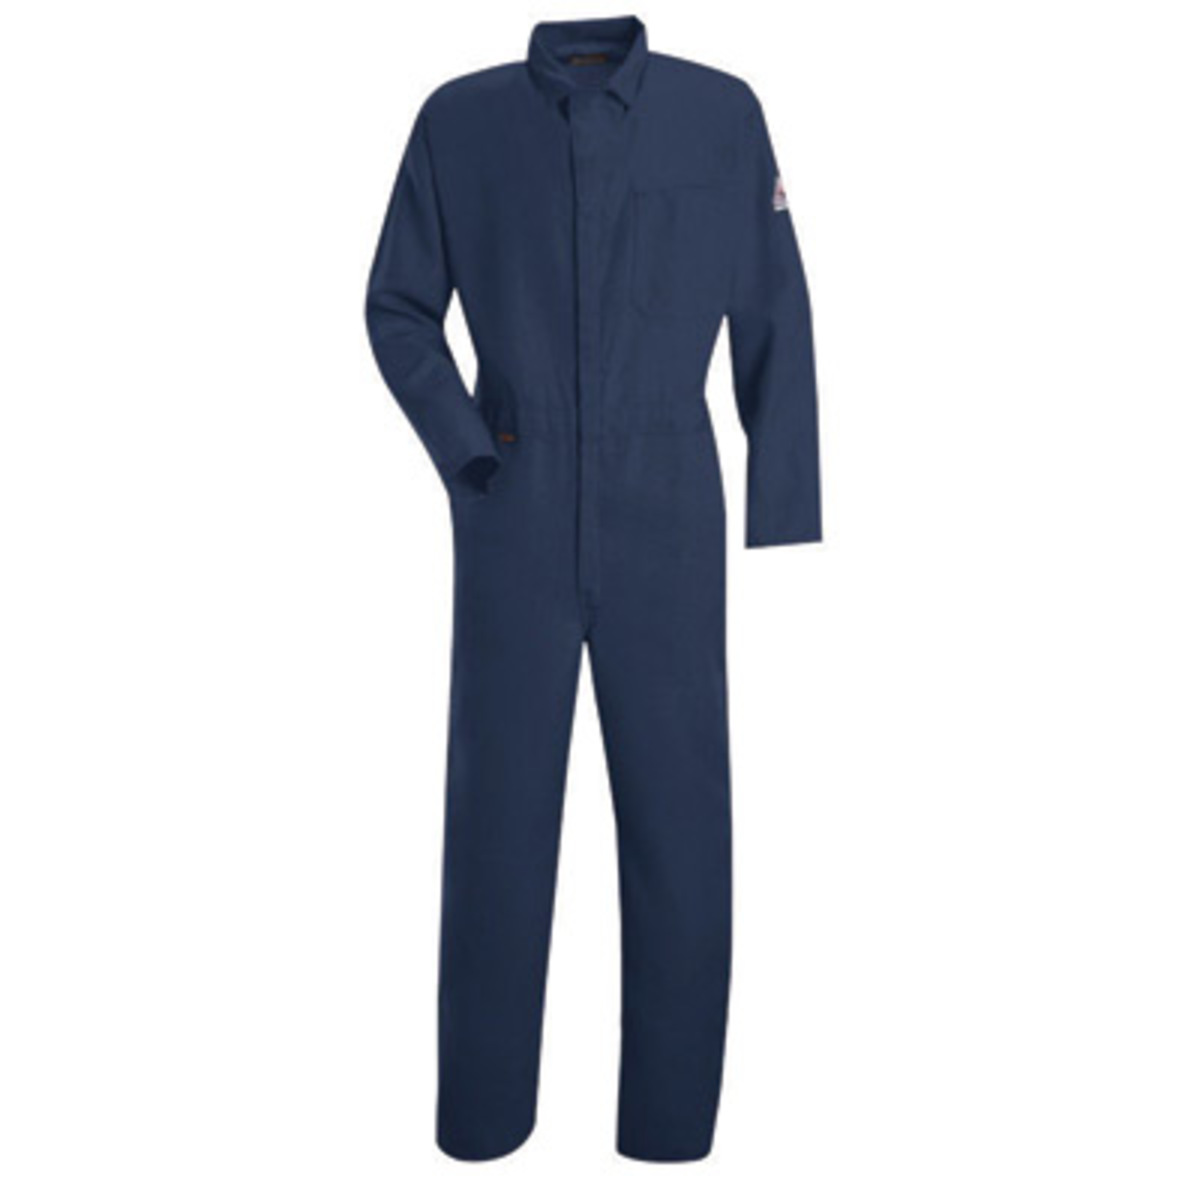 Stanco Safety Products™ Large Navy Blue Nomex® IIIA Arc Rated Flame Resistant Coveralls With Concealed 2-Way Front Zipper Closur